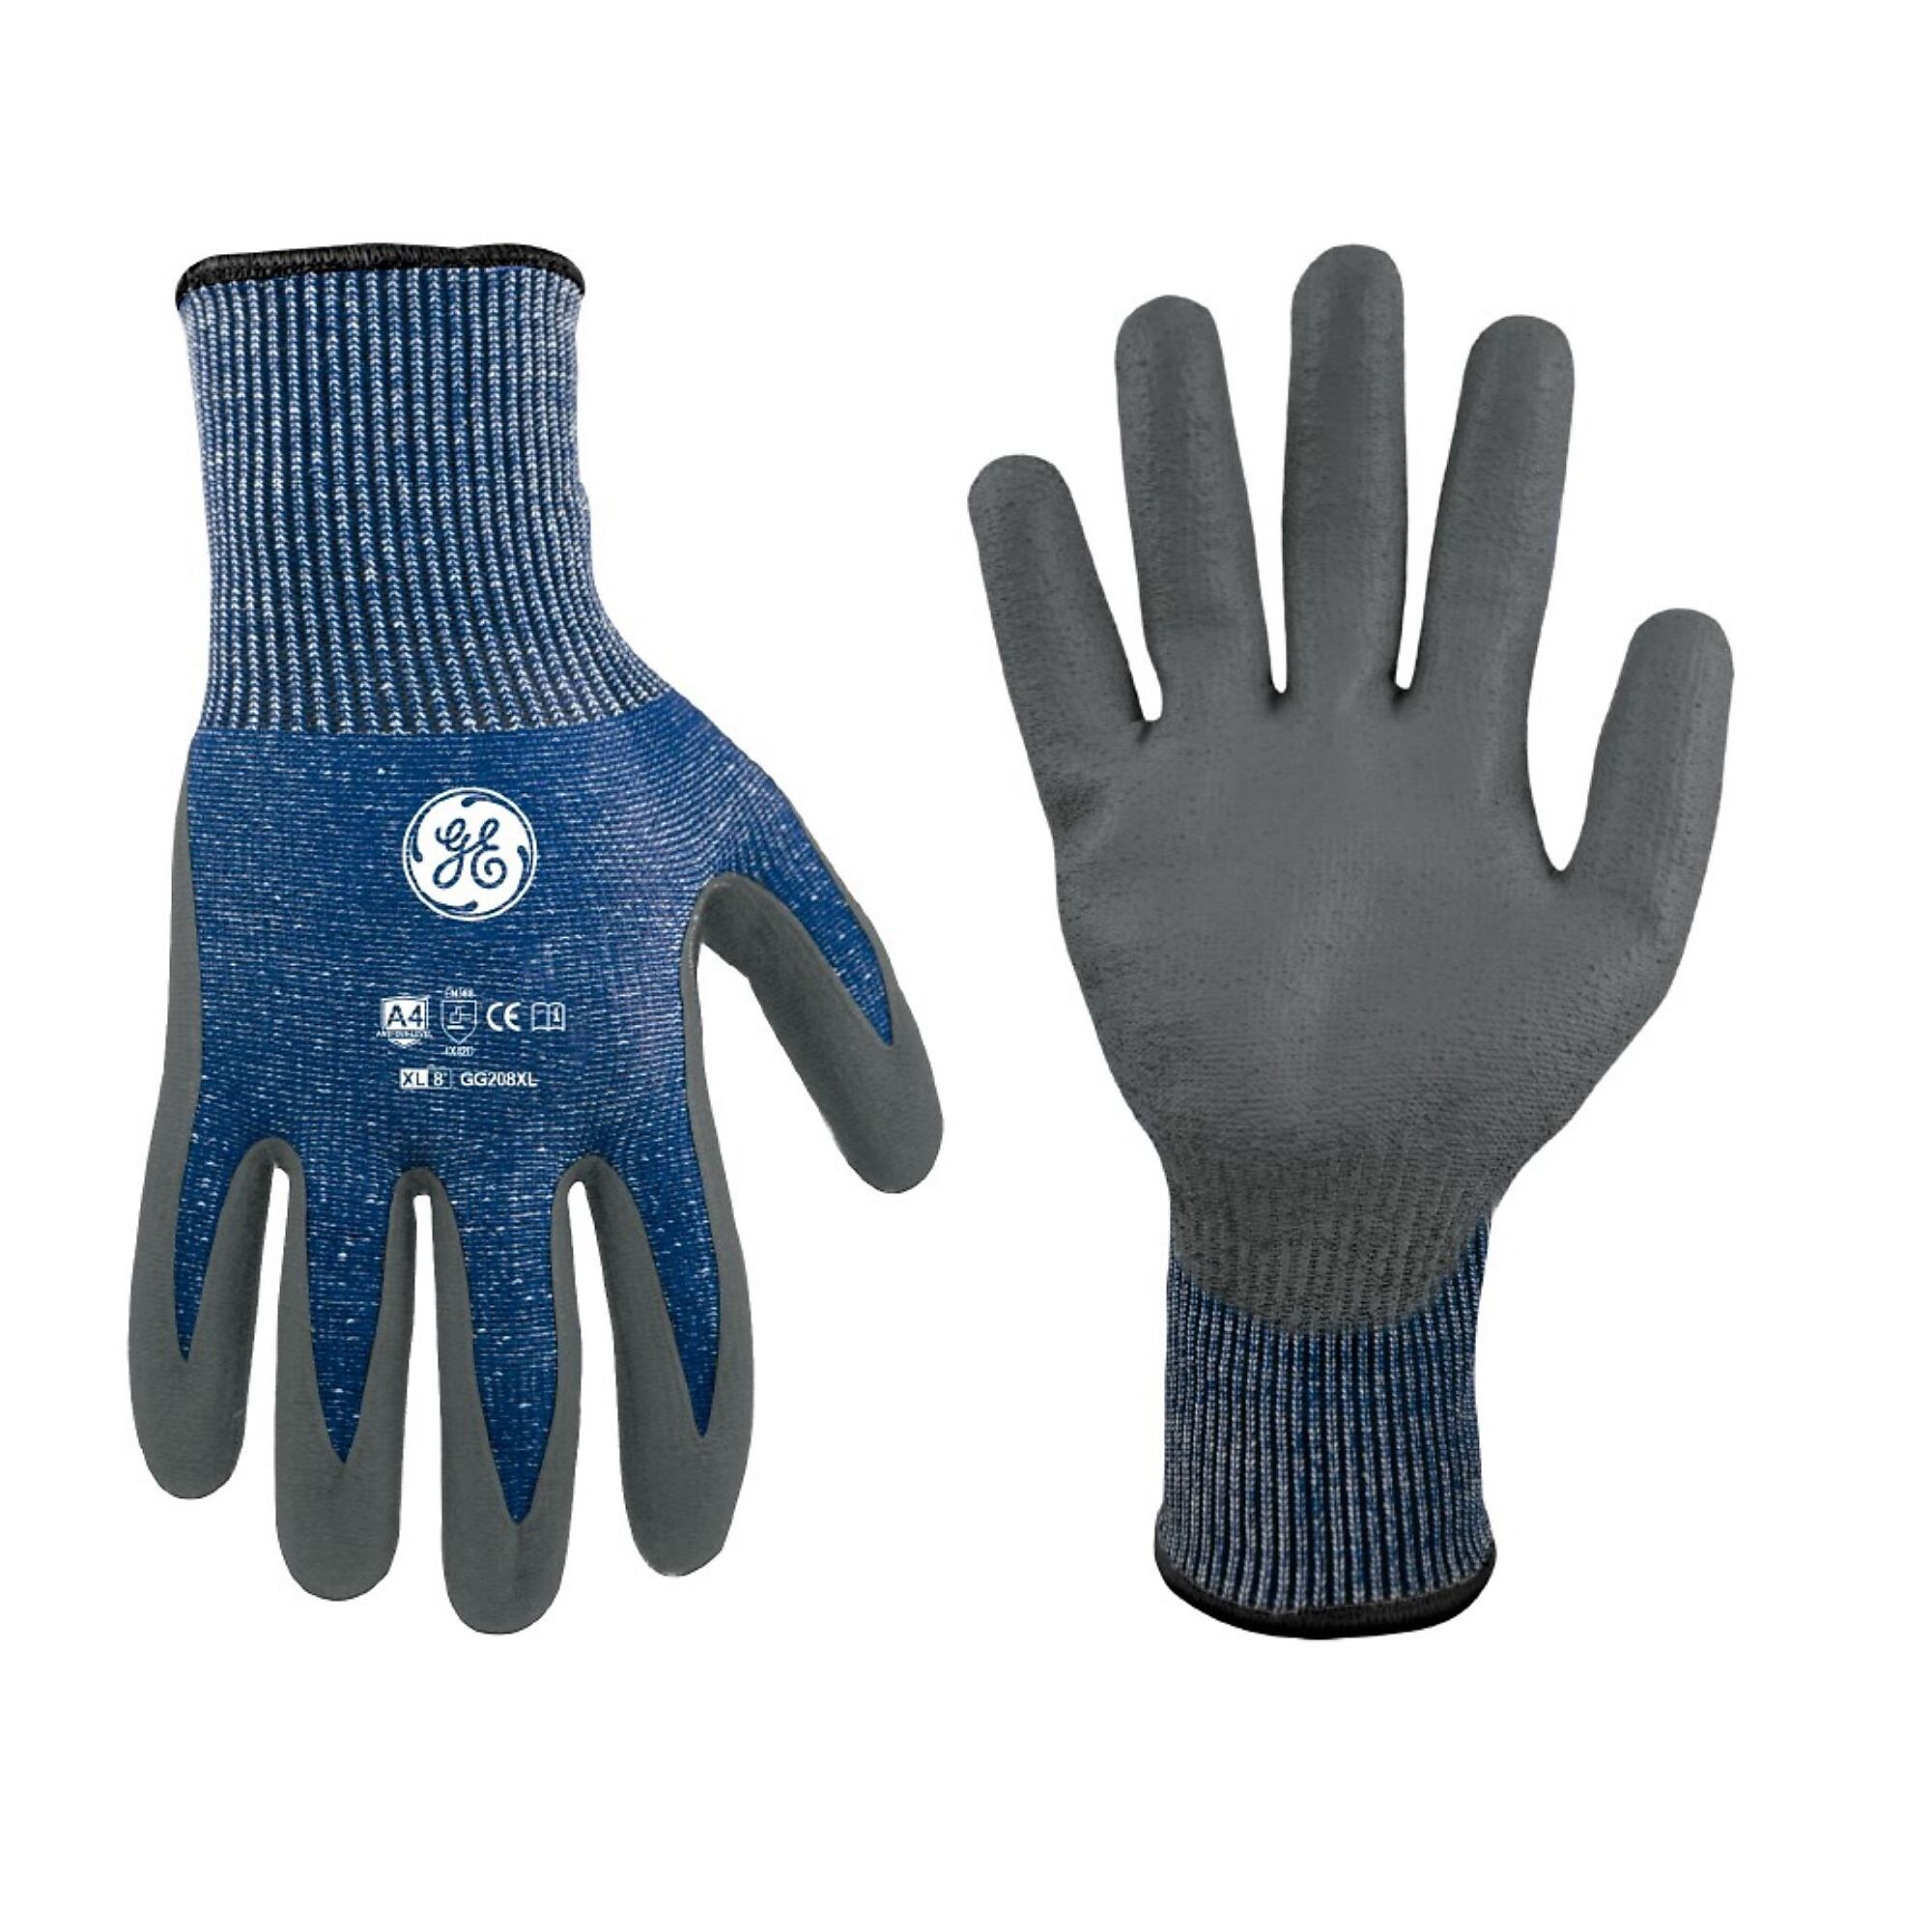 General Electric, Cut Resistant Gloves Blue/Gray XL 12 pair, Size XL, Color Gray, Included (qty.) 12 Model GG208XL